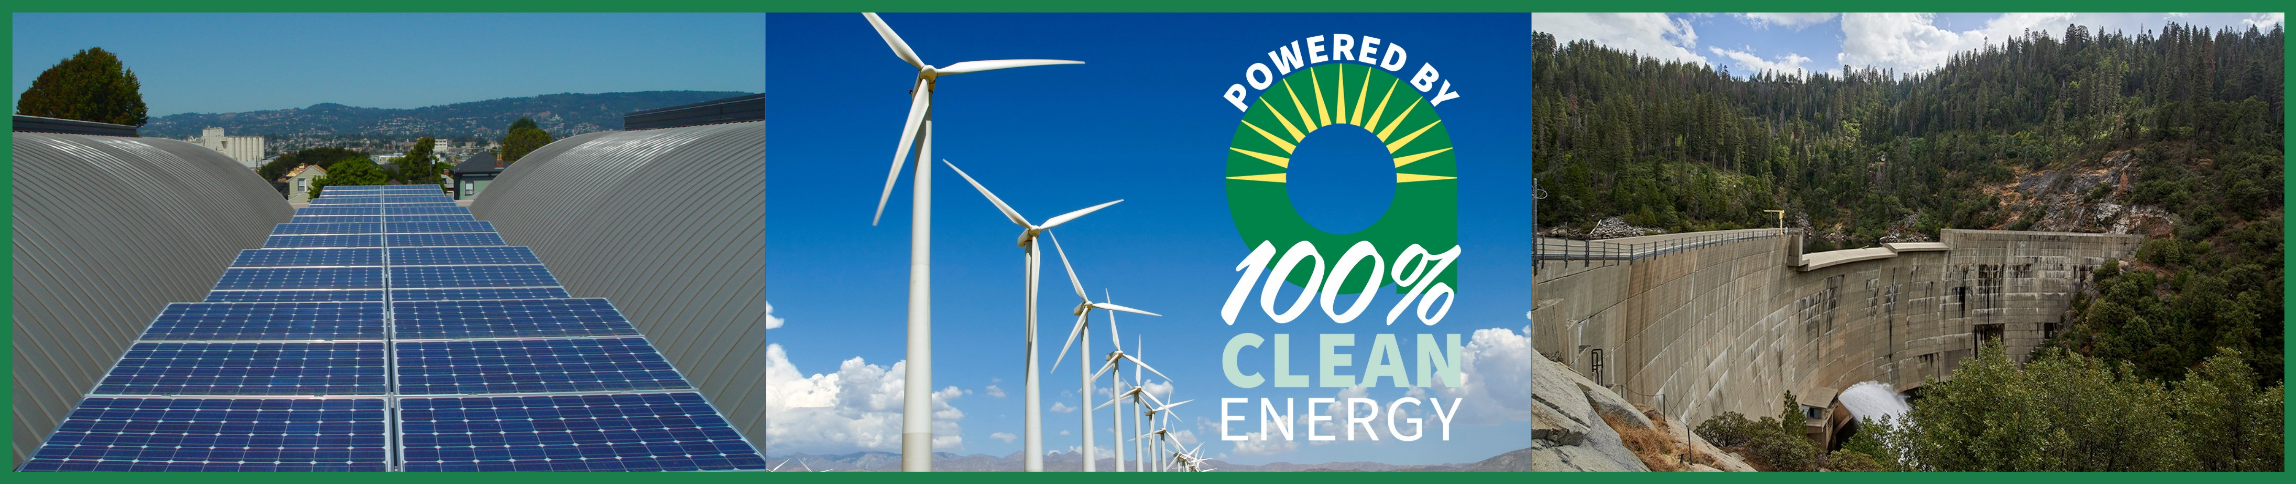 AMP-Photos_Clean-Energy_1.png